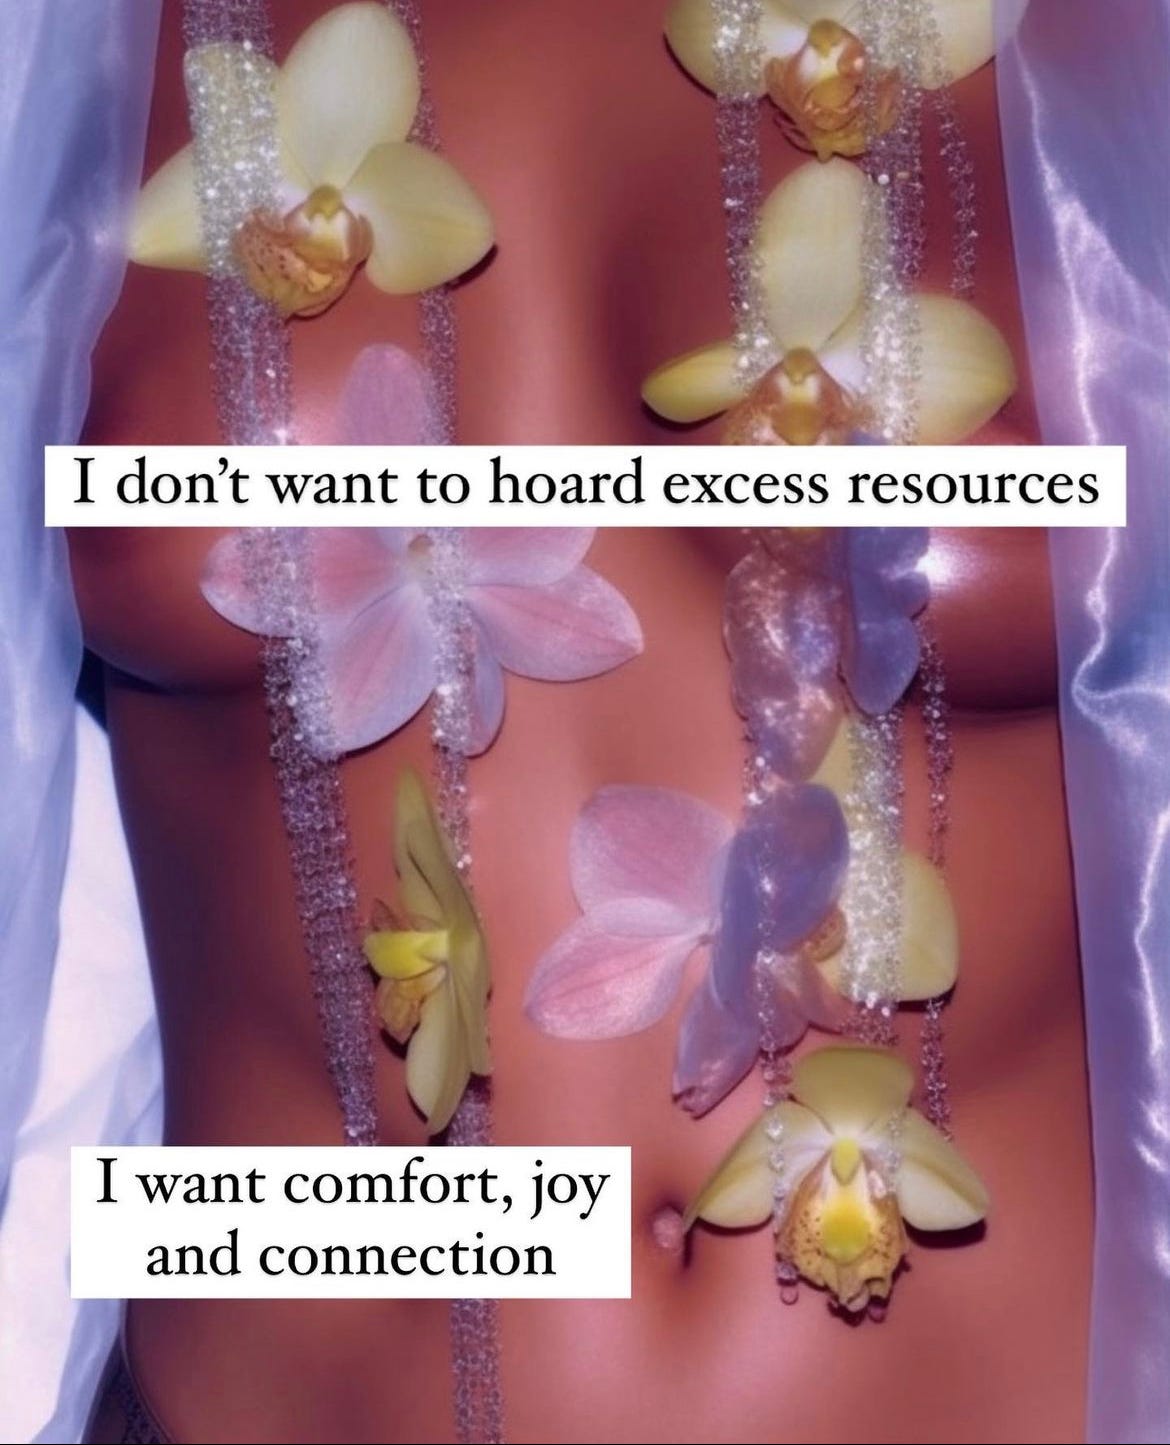 Over a Black woman's body covered in a floral, necklace and lavender cloth, it reads: I don't want to hoard excess resources. I want comfort, joy, and connection